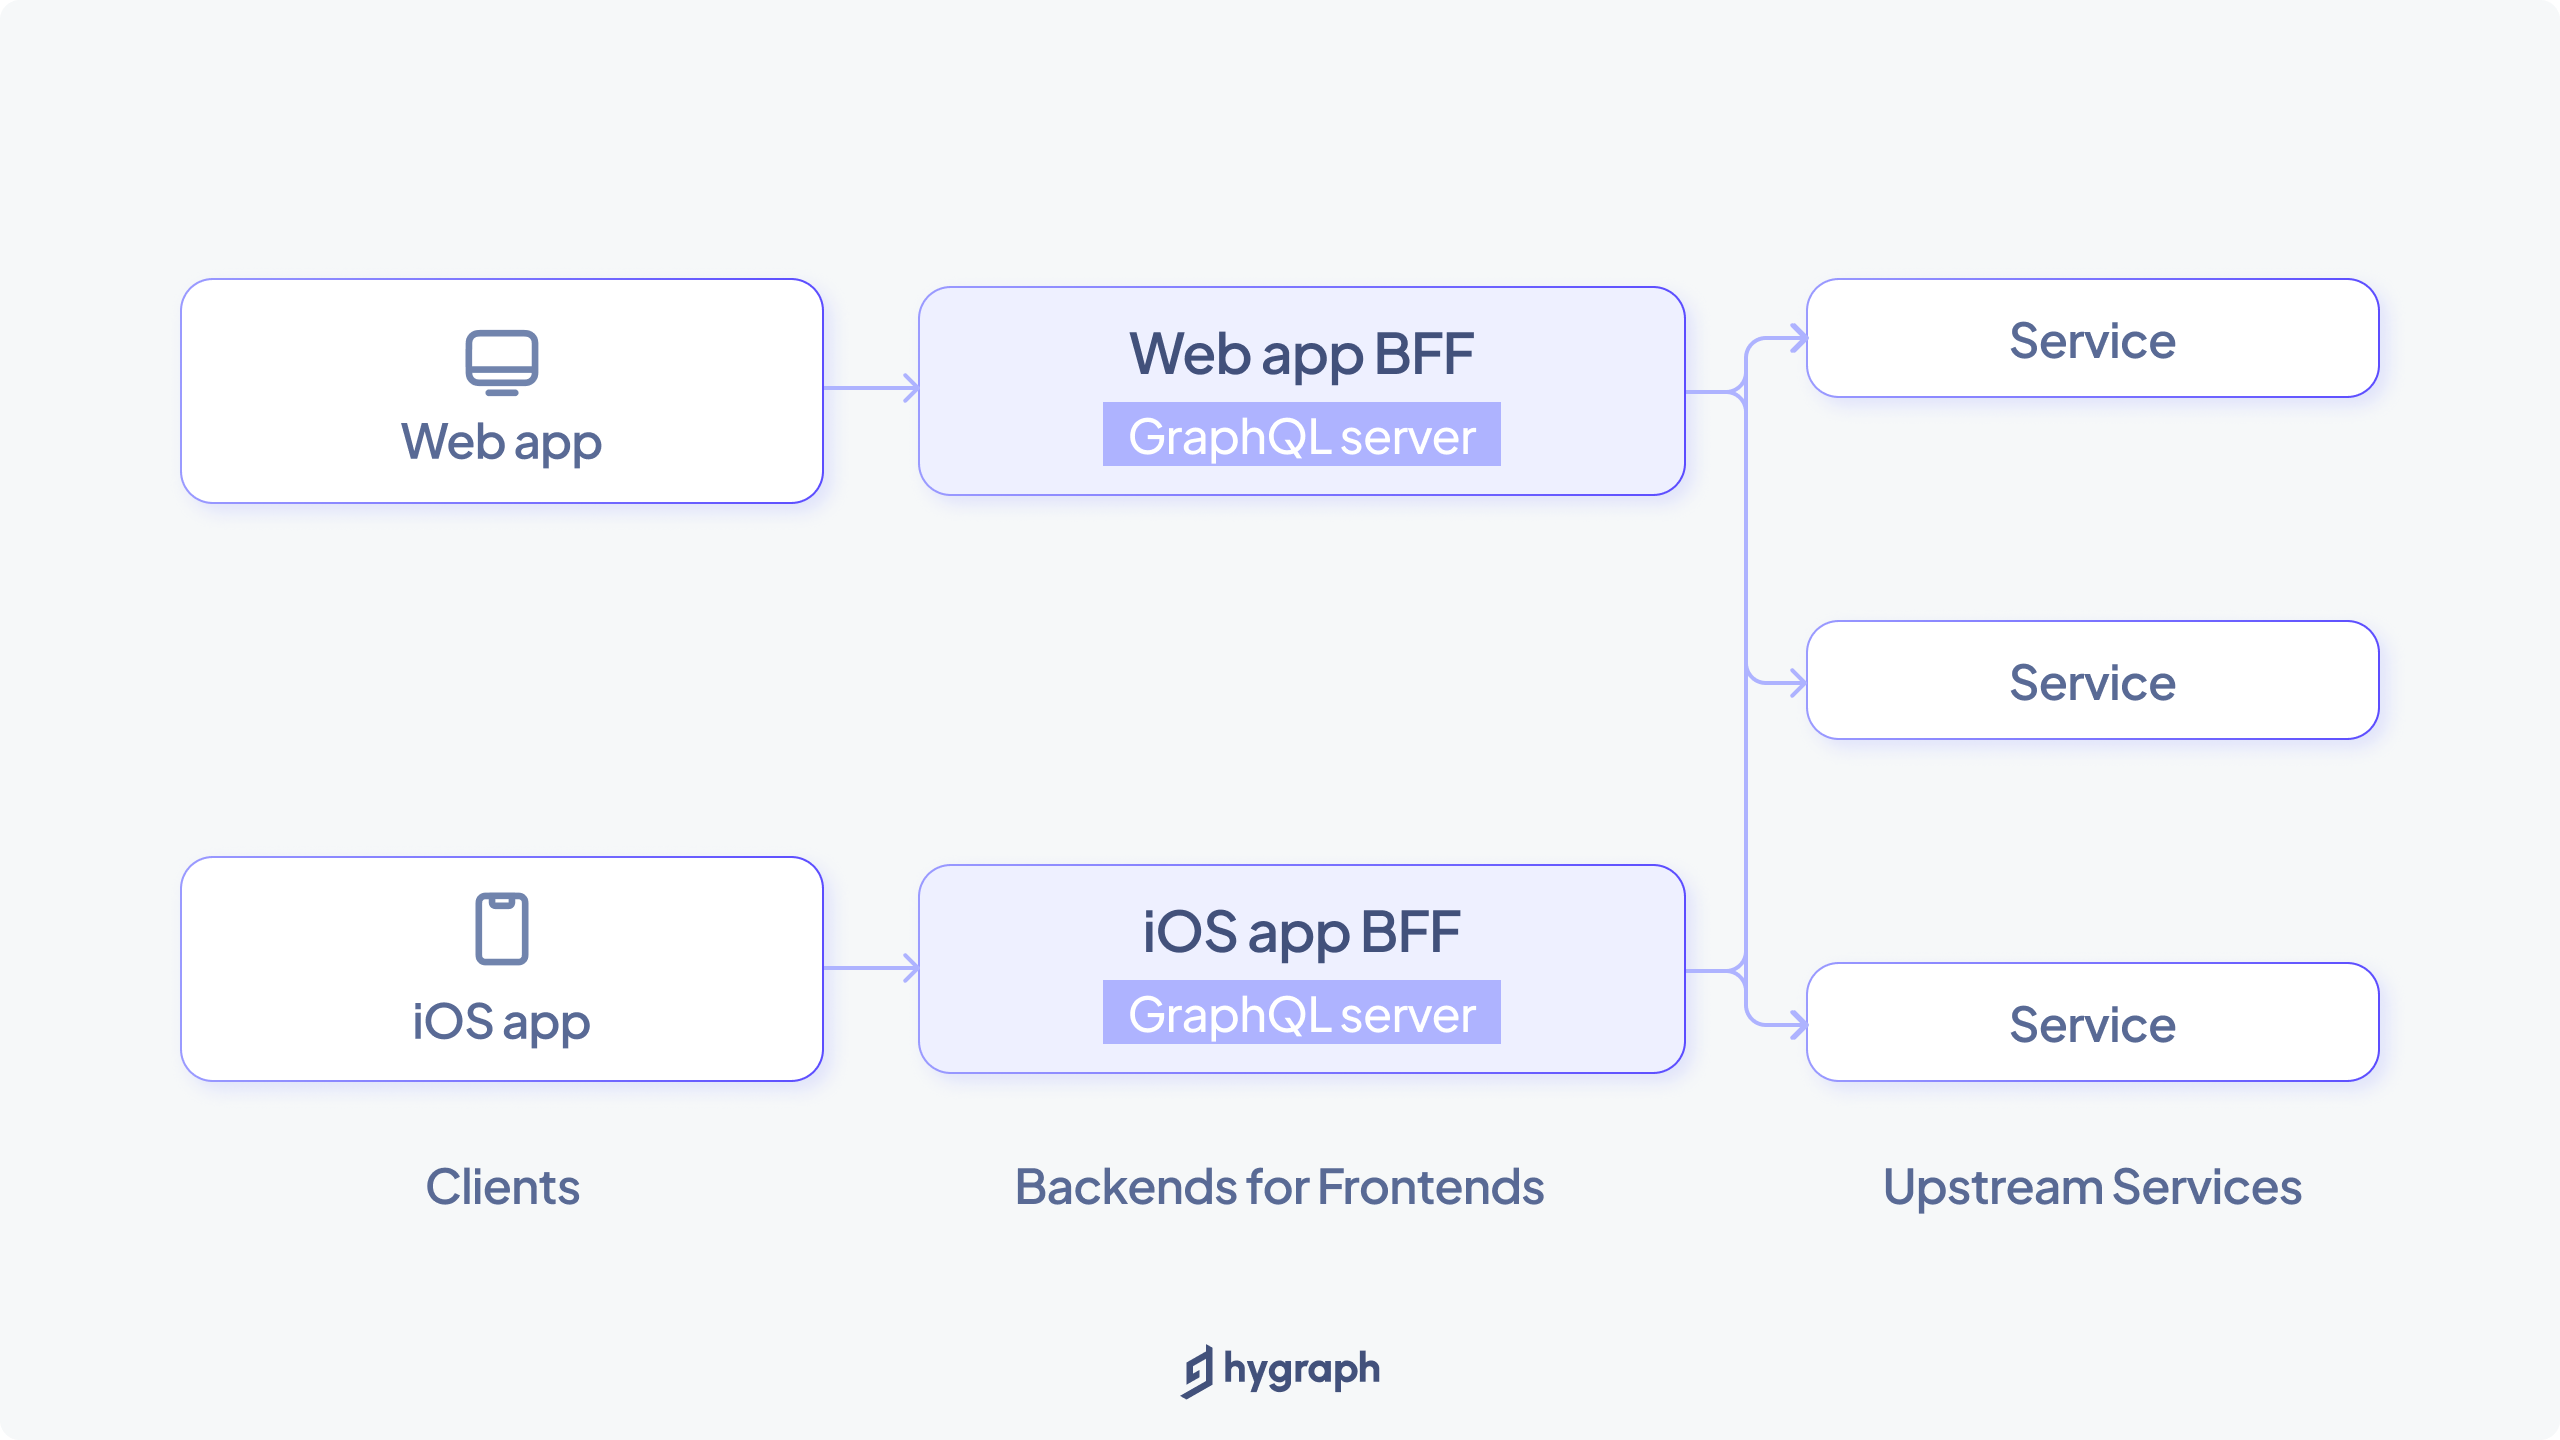 Backends for frontends